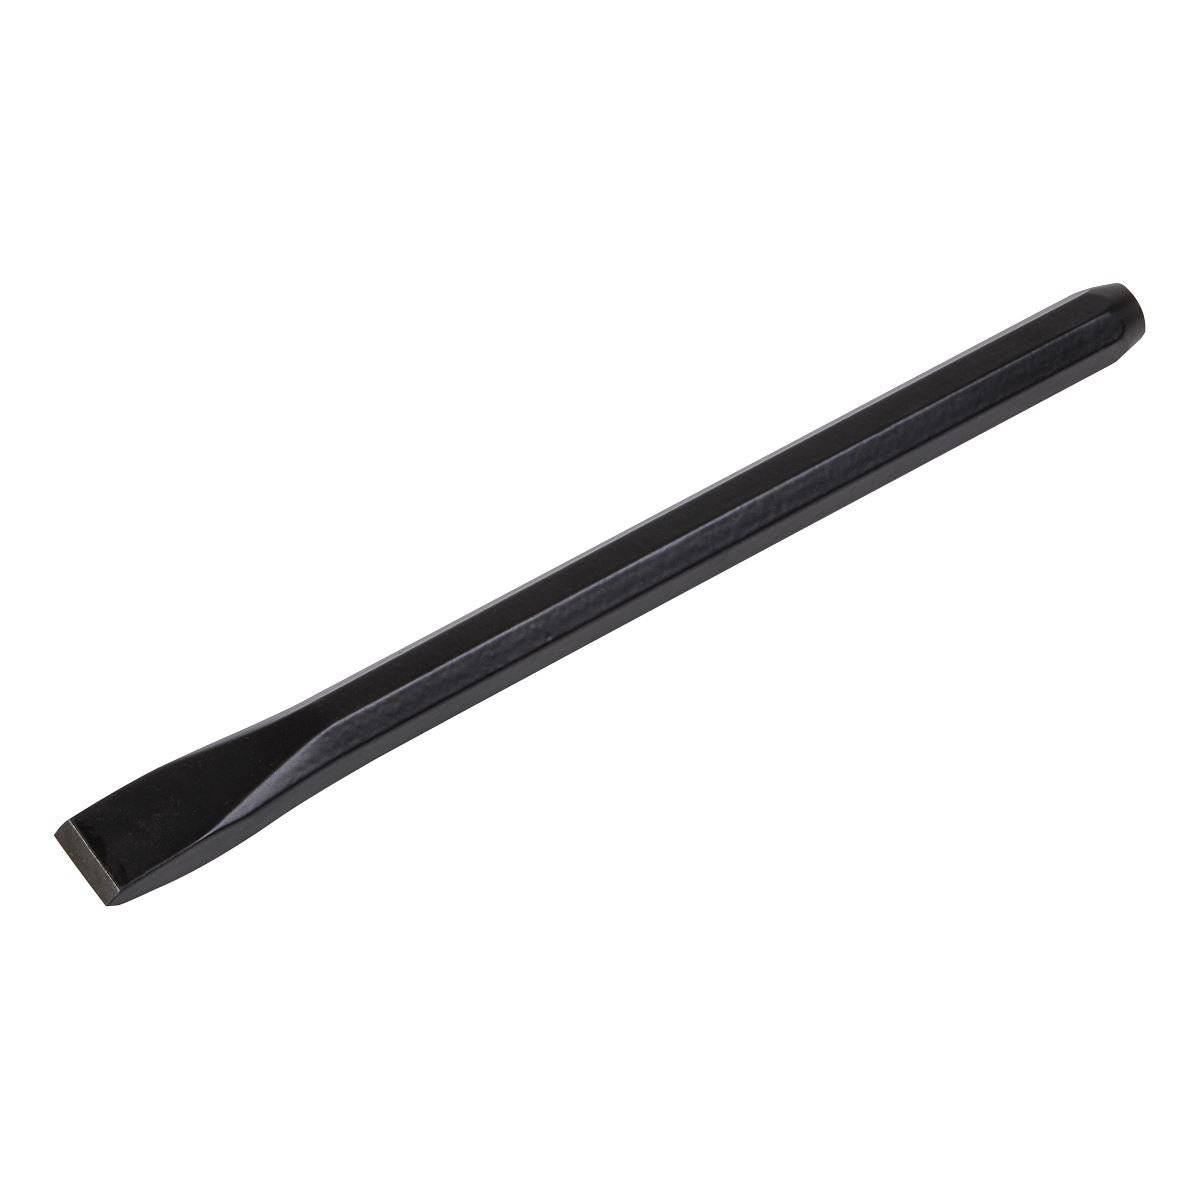 Sealey Cold Chisel 19 x 250mm